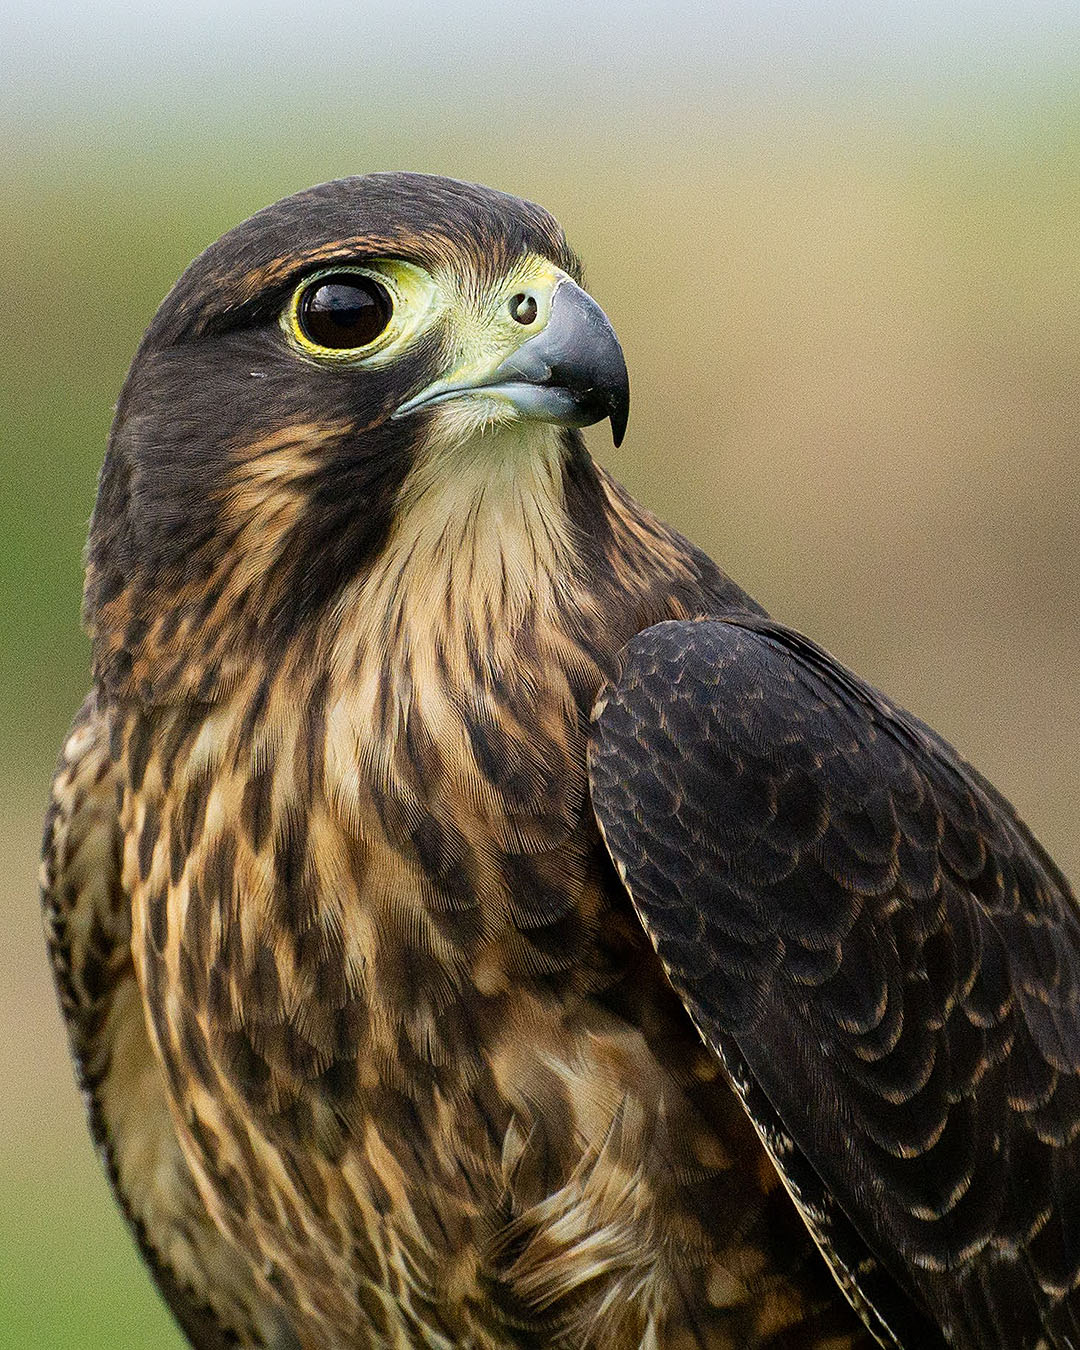 A stunning close up view of a New Zealand falcon.